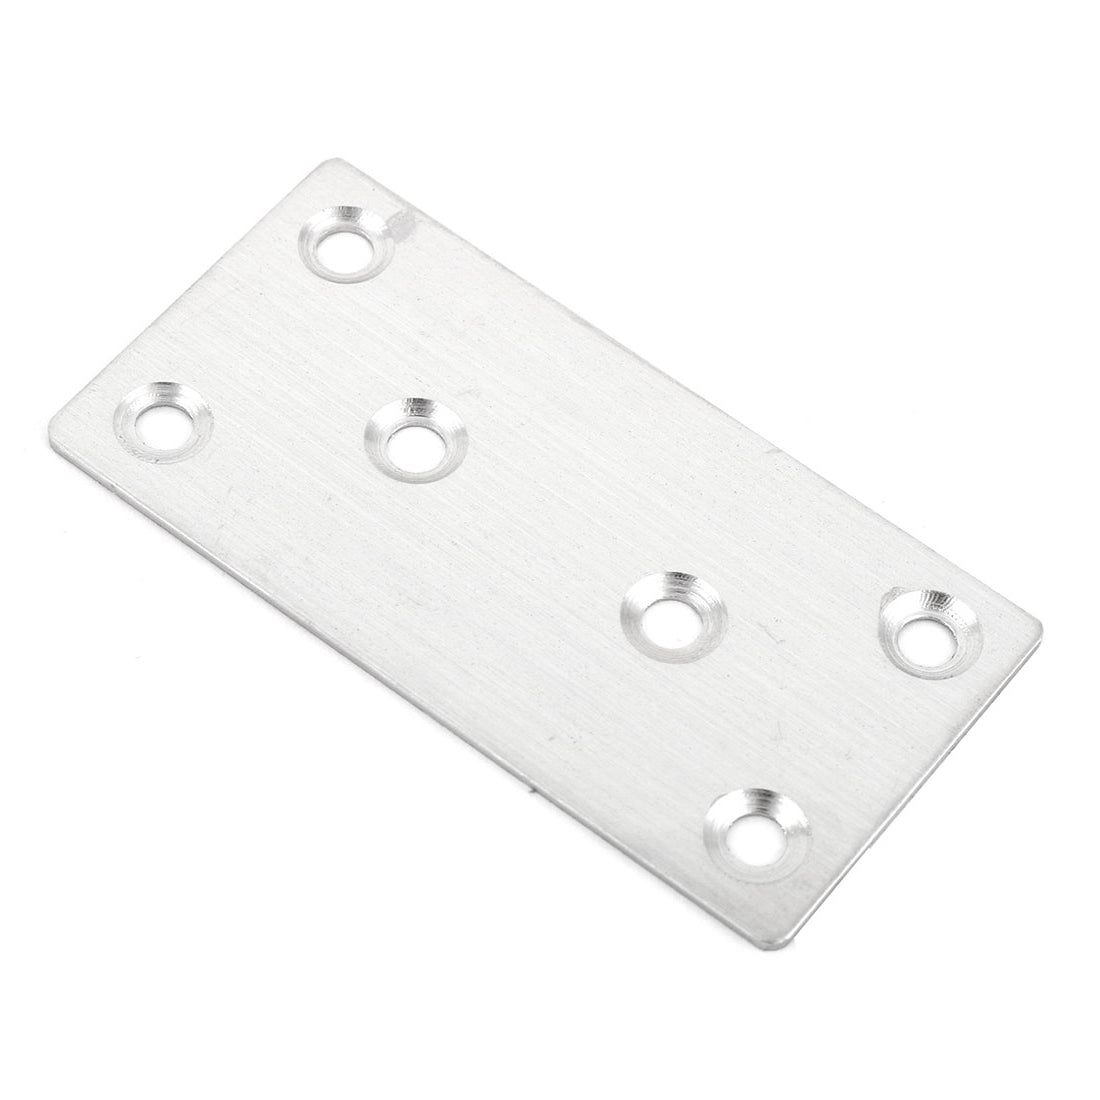 uxcell Uxcell Furniture Stainless Steel Rectangle Shape Flat Repair Fixing Plate Angle Bracket Silver Tone